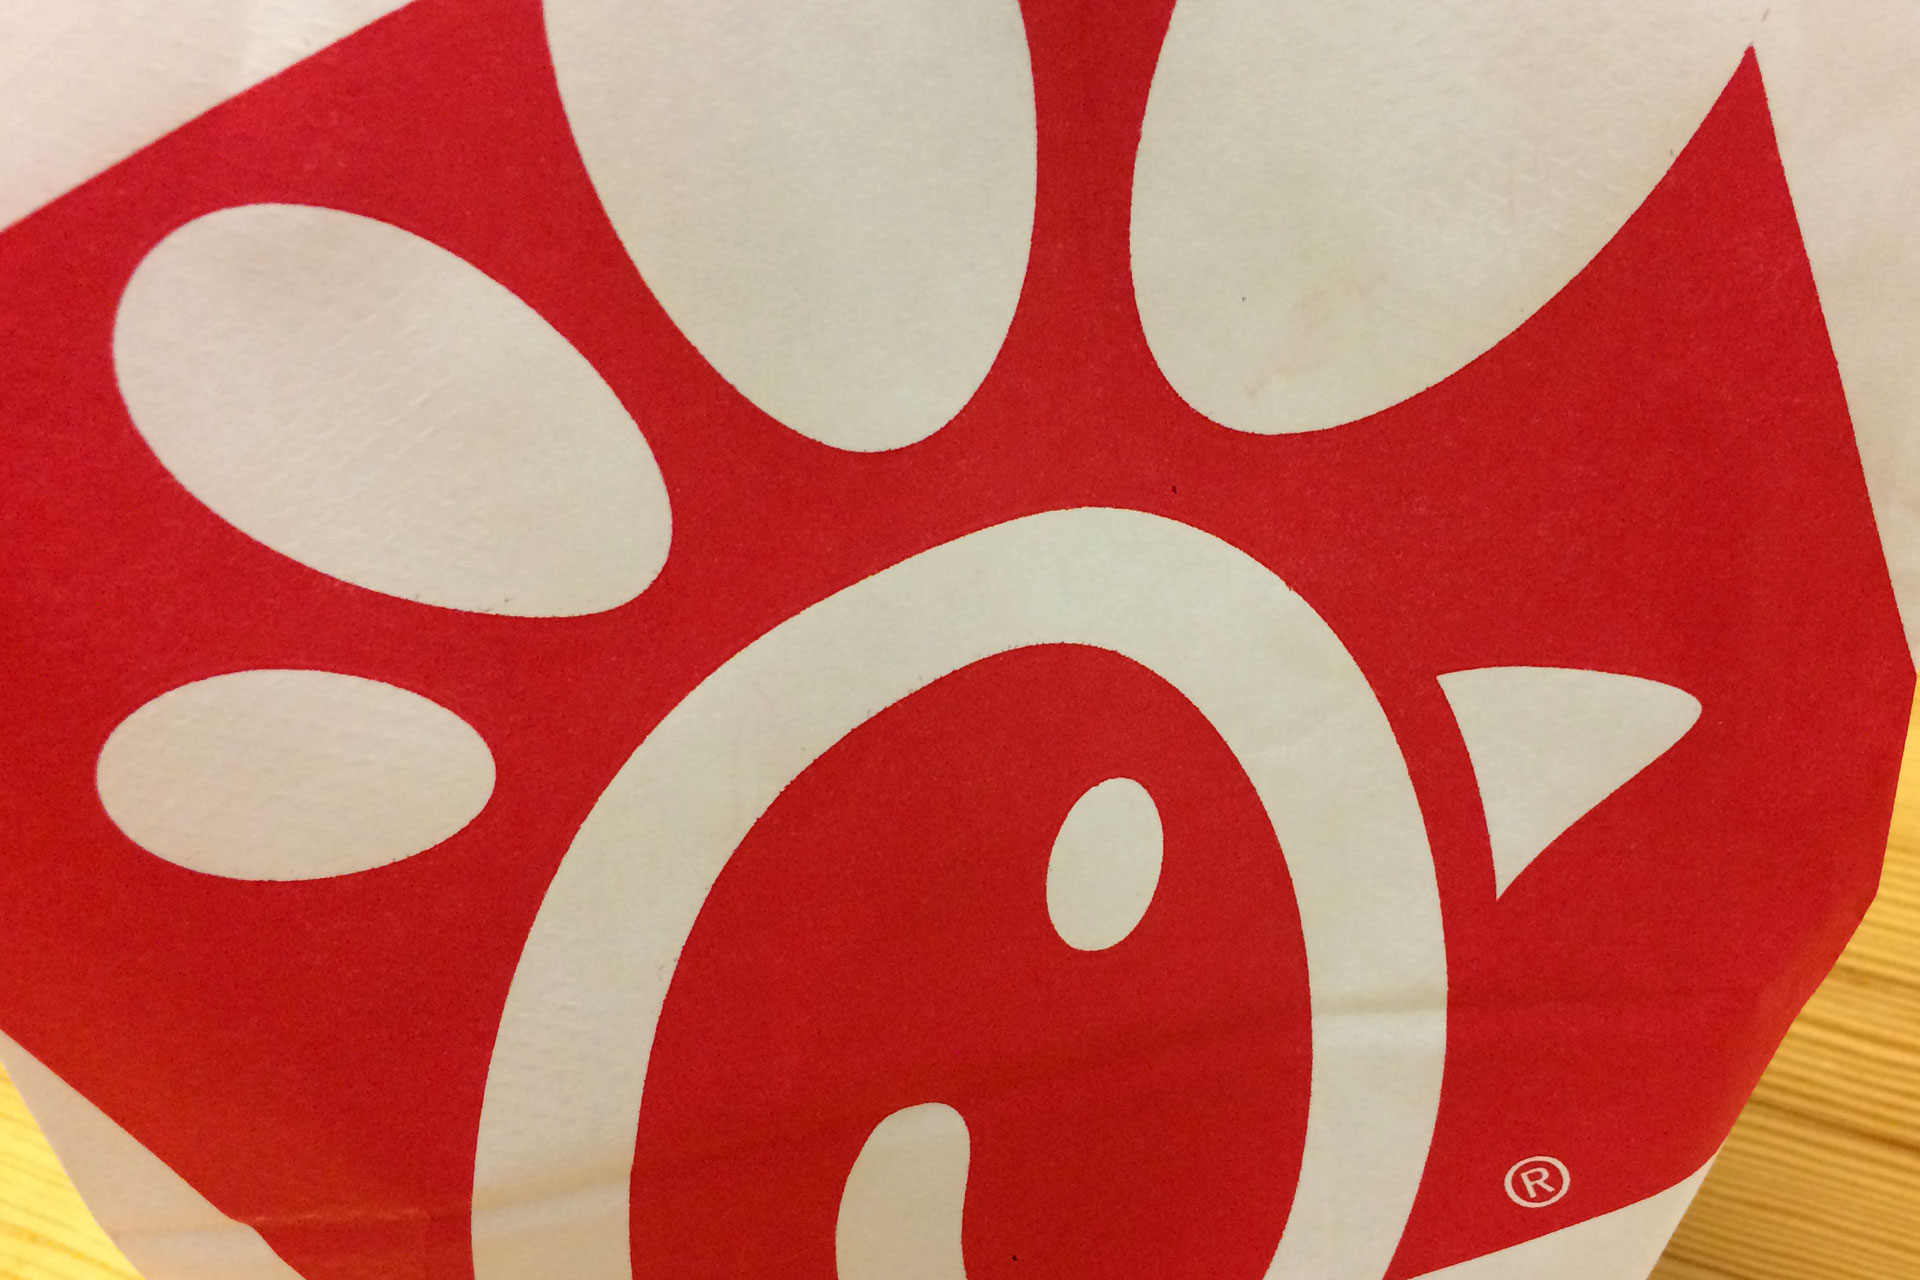 A Lesson from Chick-fil-A: Don't Serve Chicken, Serve People